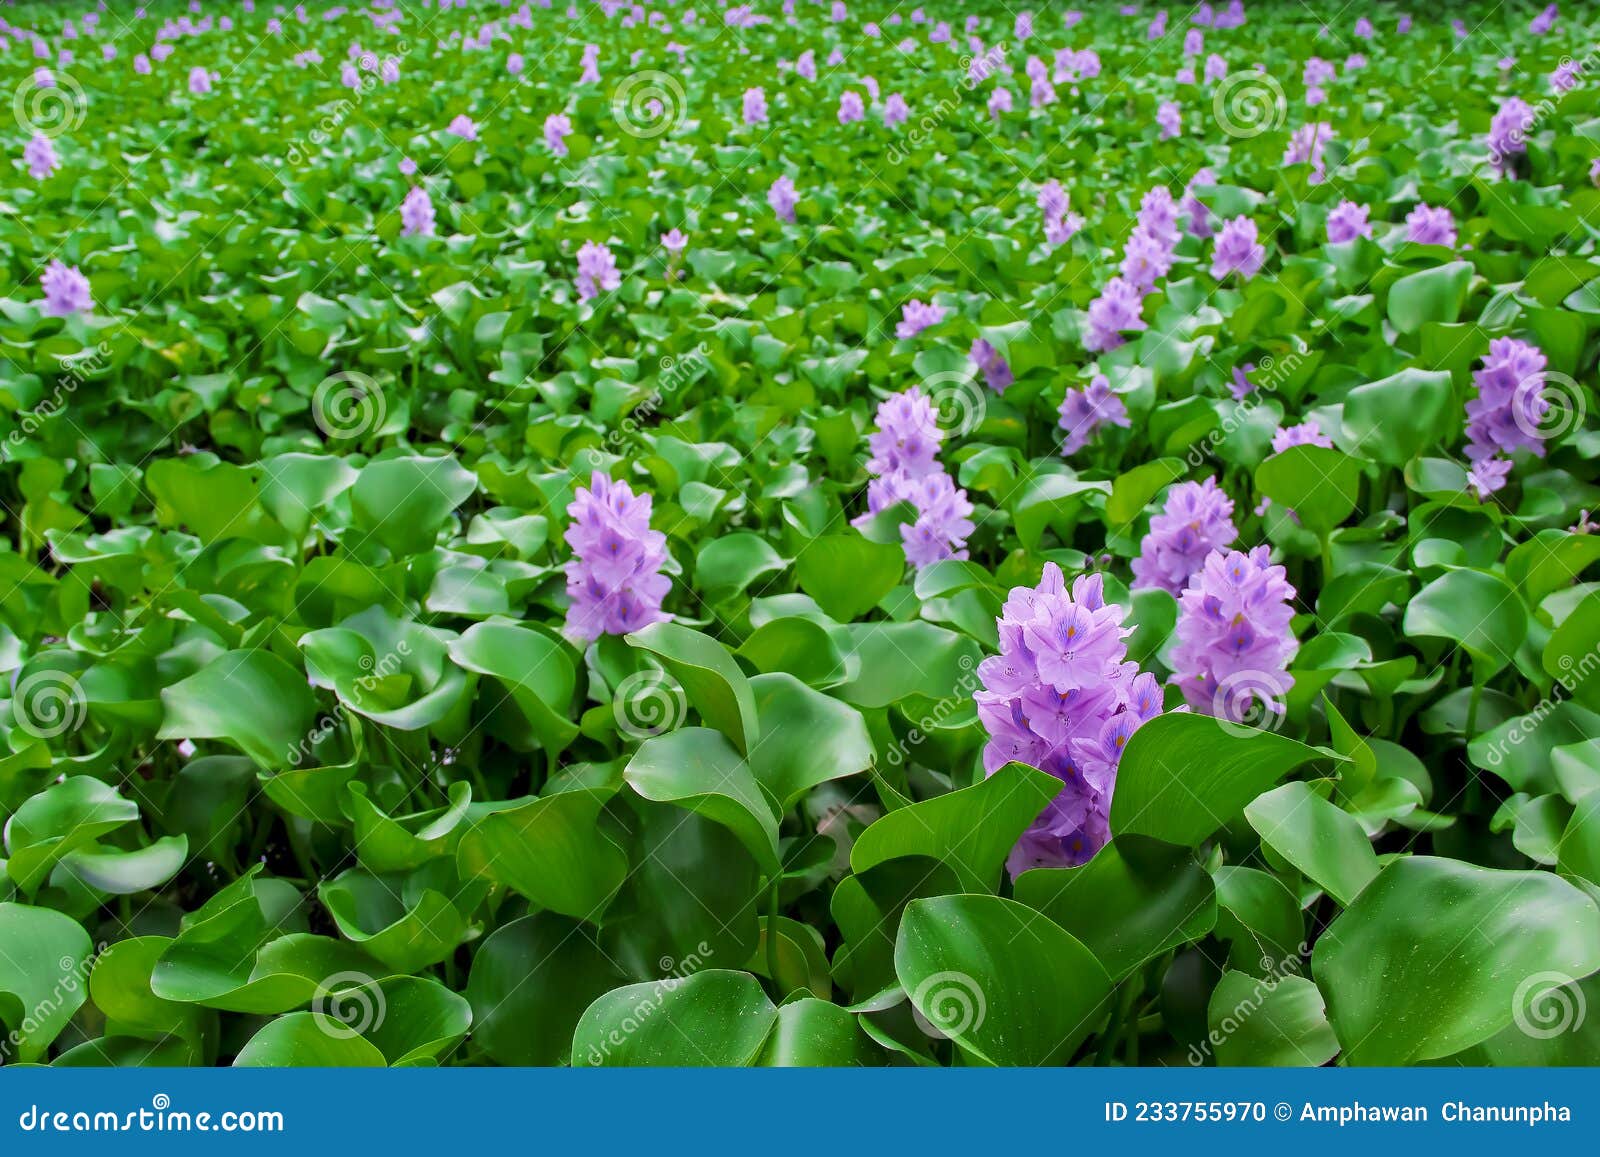 floating water hyacinth field eichornia crassipes in the river natural background